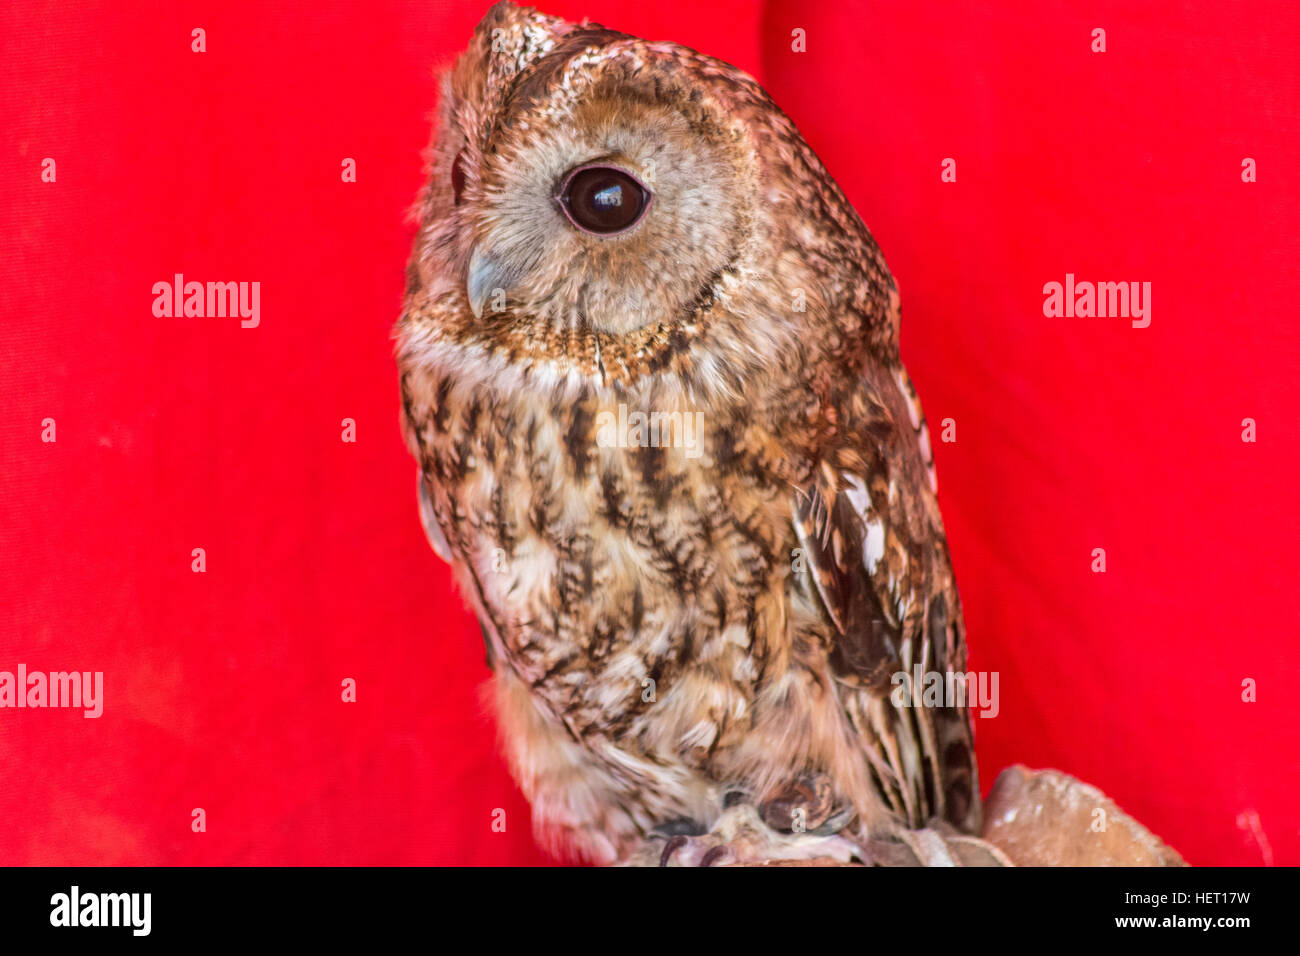 Owl looking curiously Stock Photo